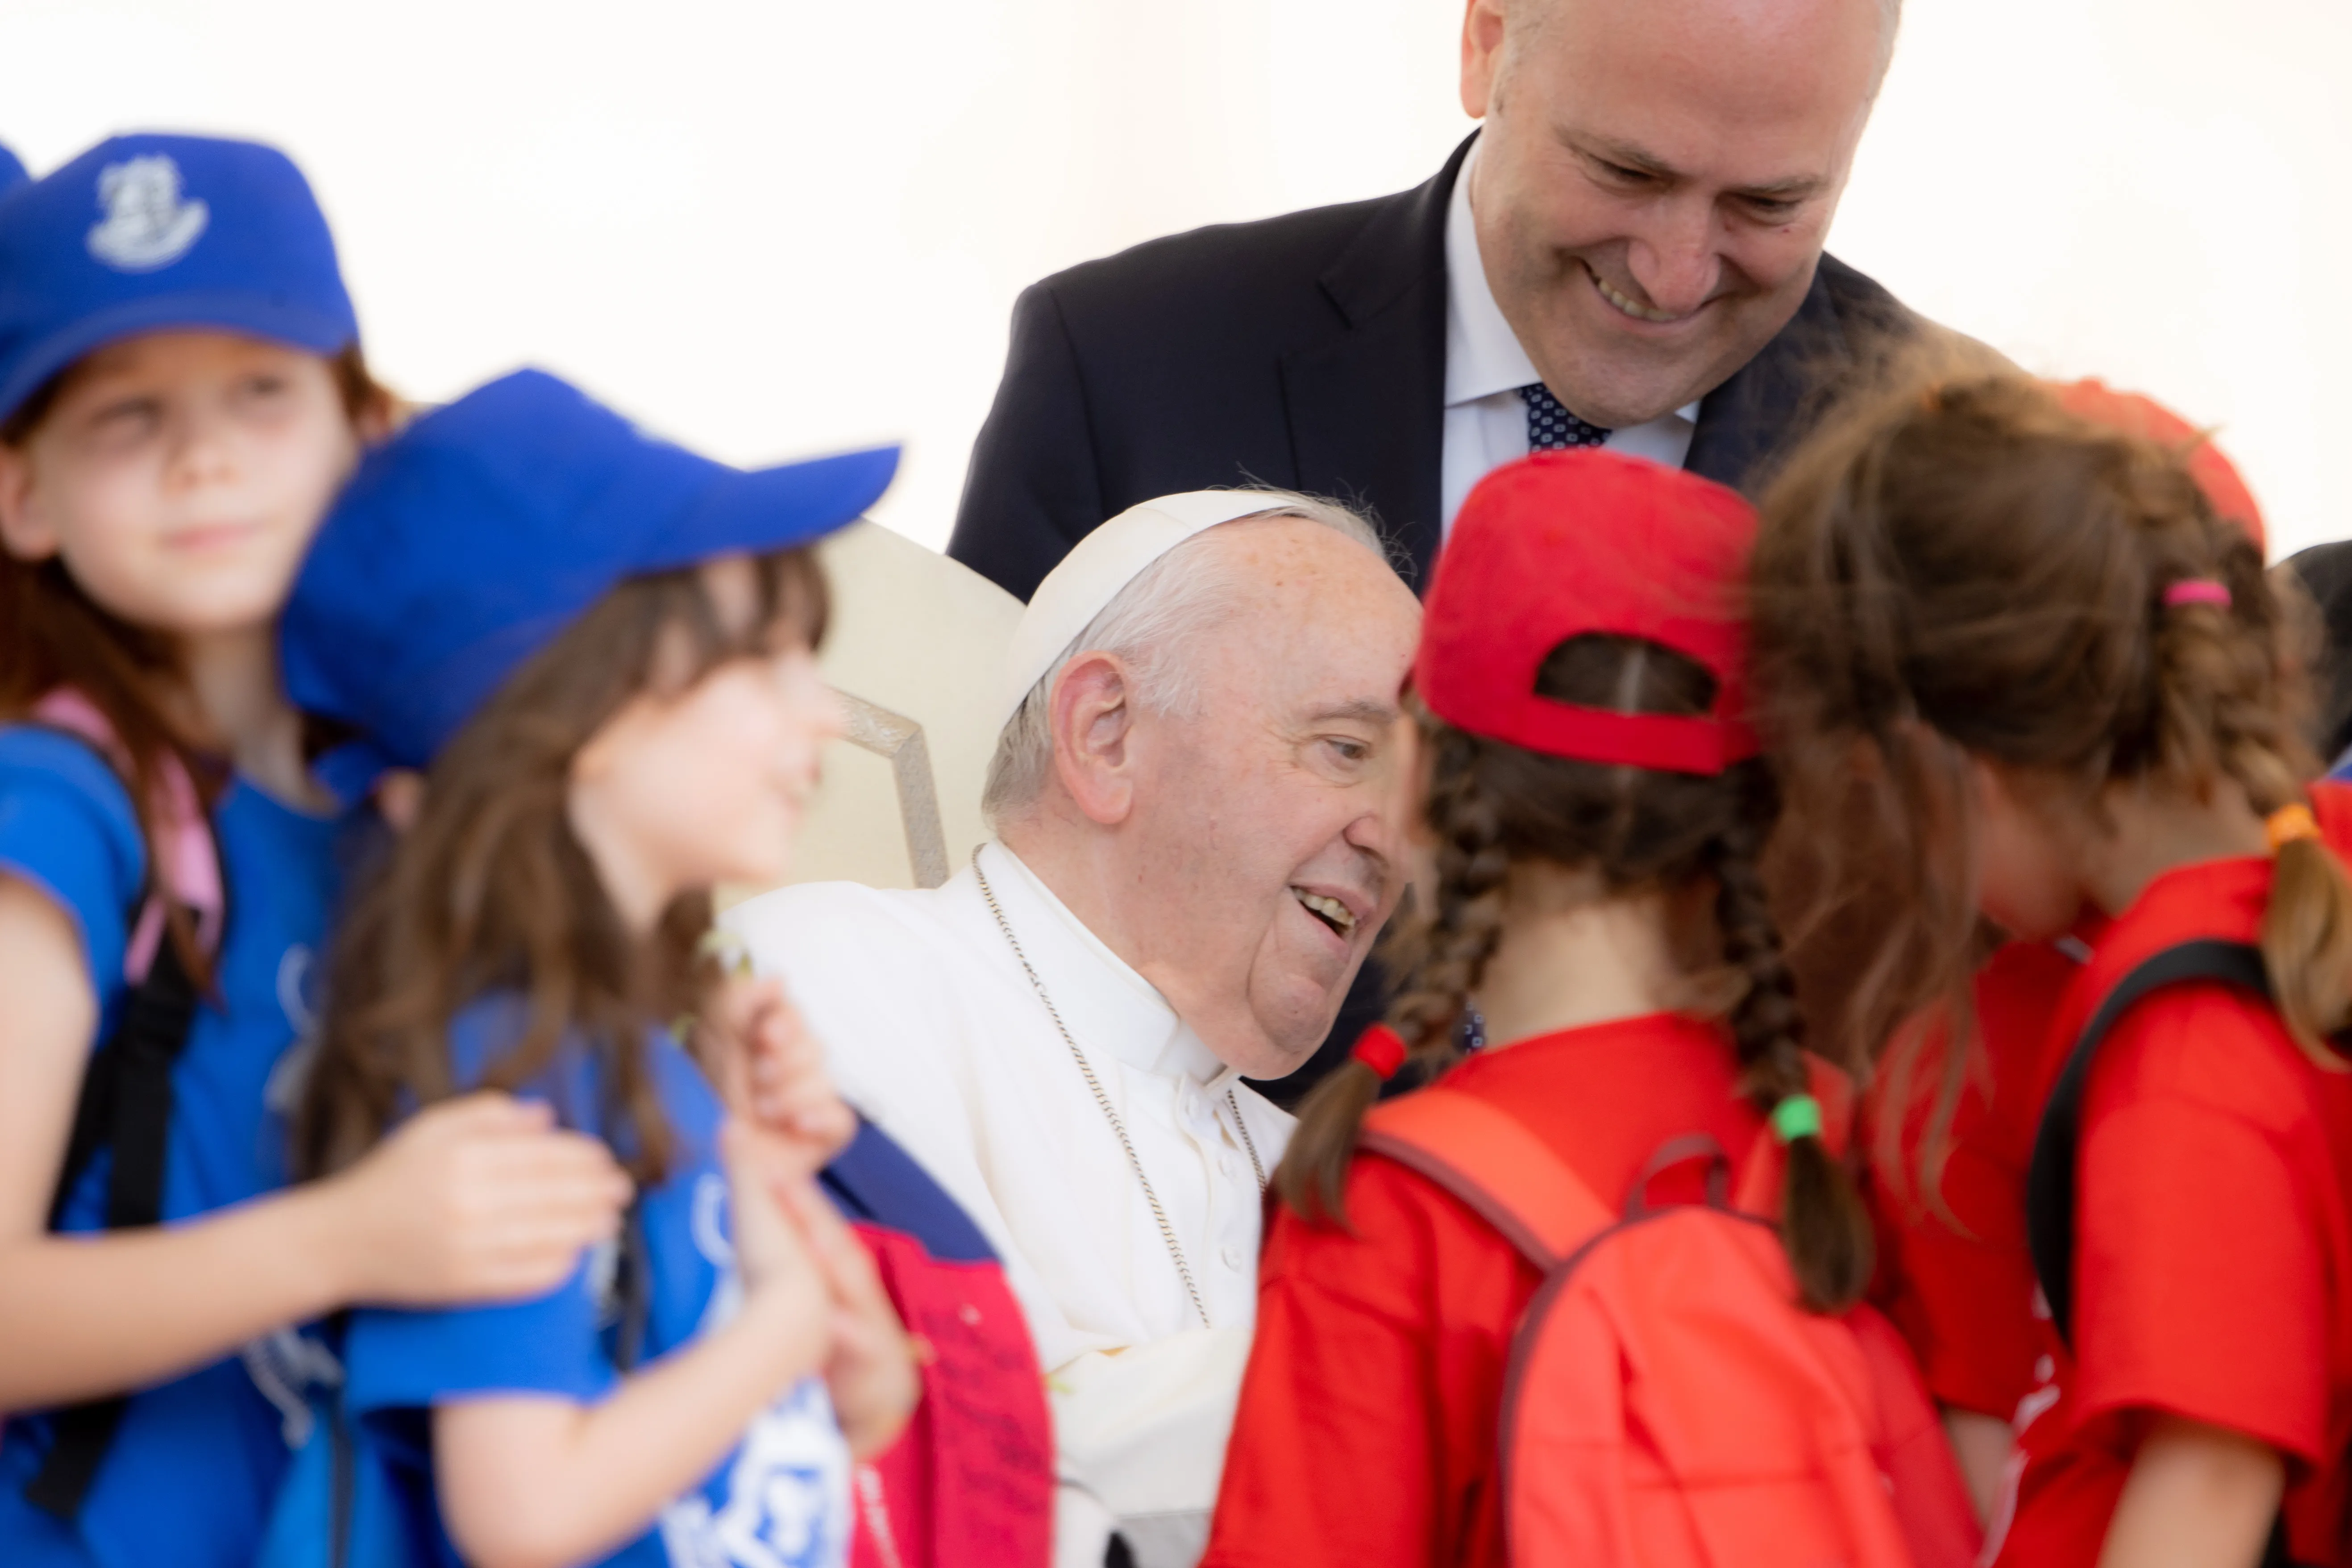 Pope Francis greets children from Ukraine who are studying at a school in Rome. Daniel Ibanez/CNA